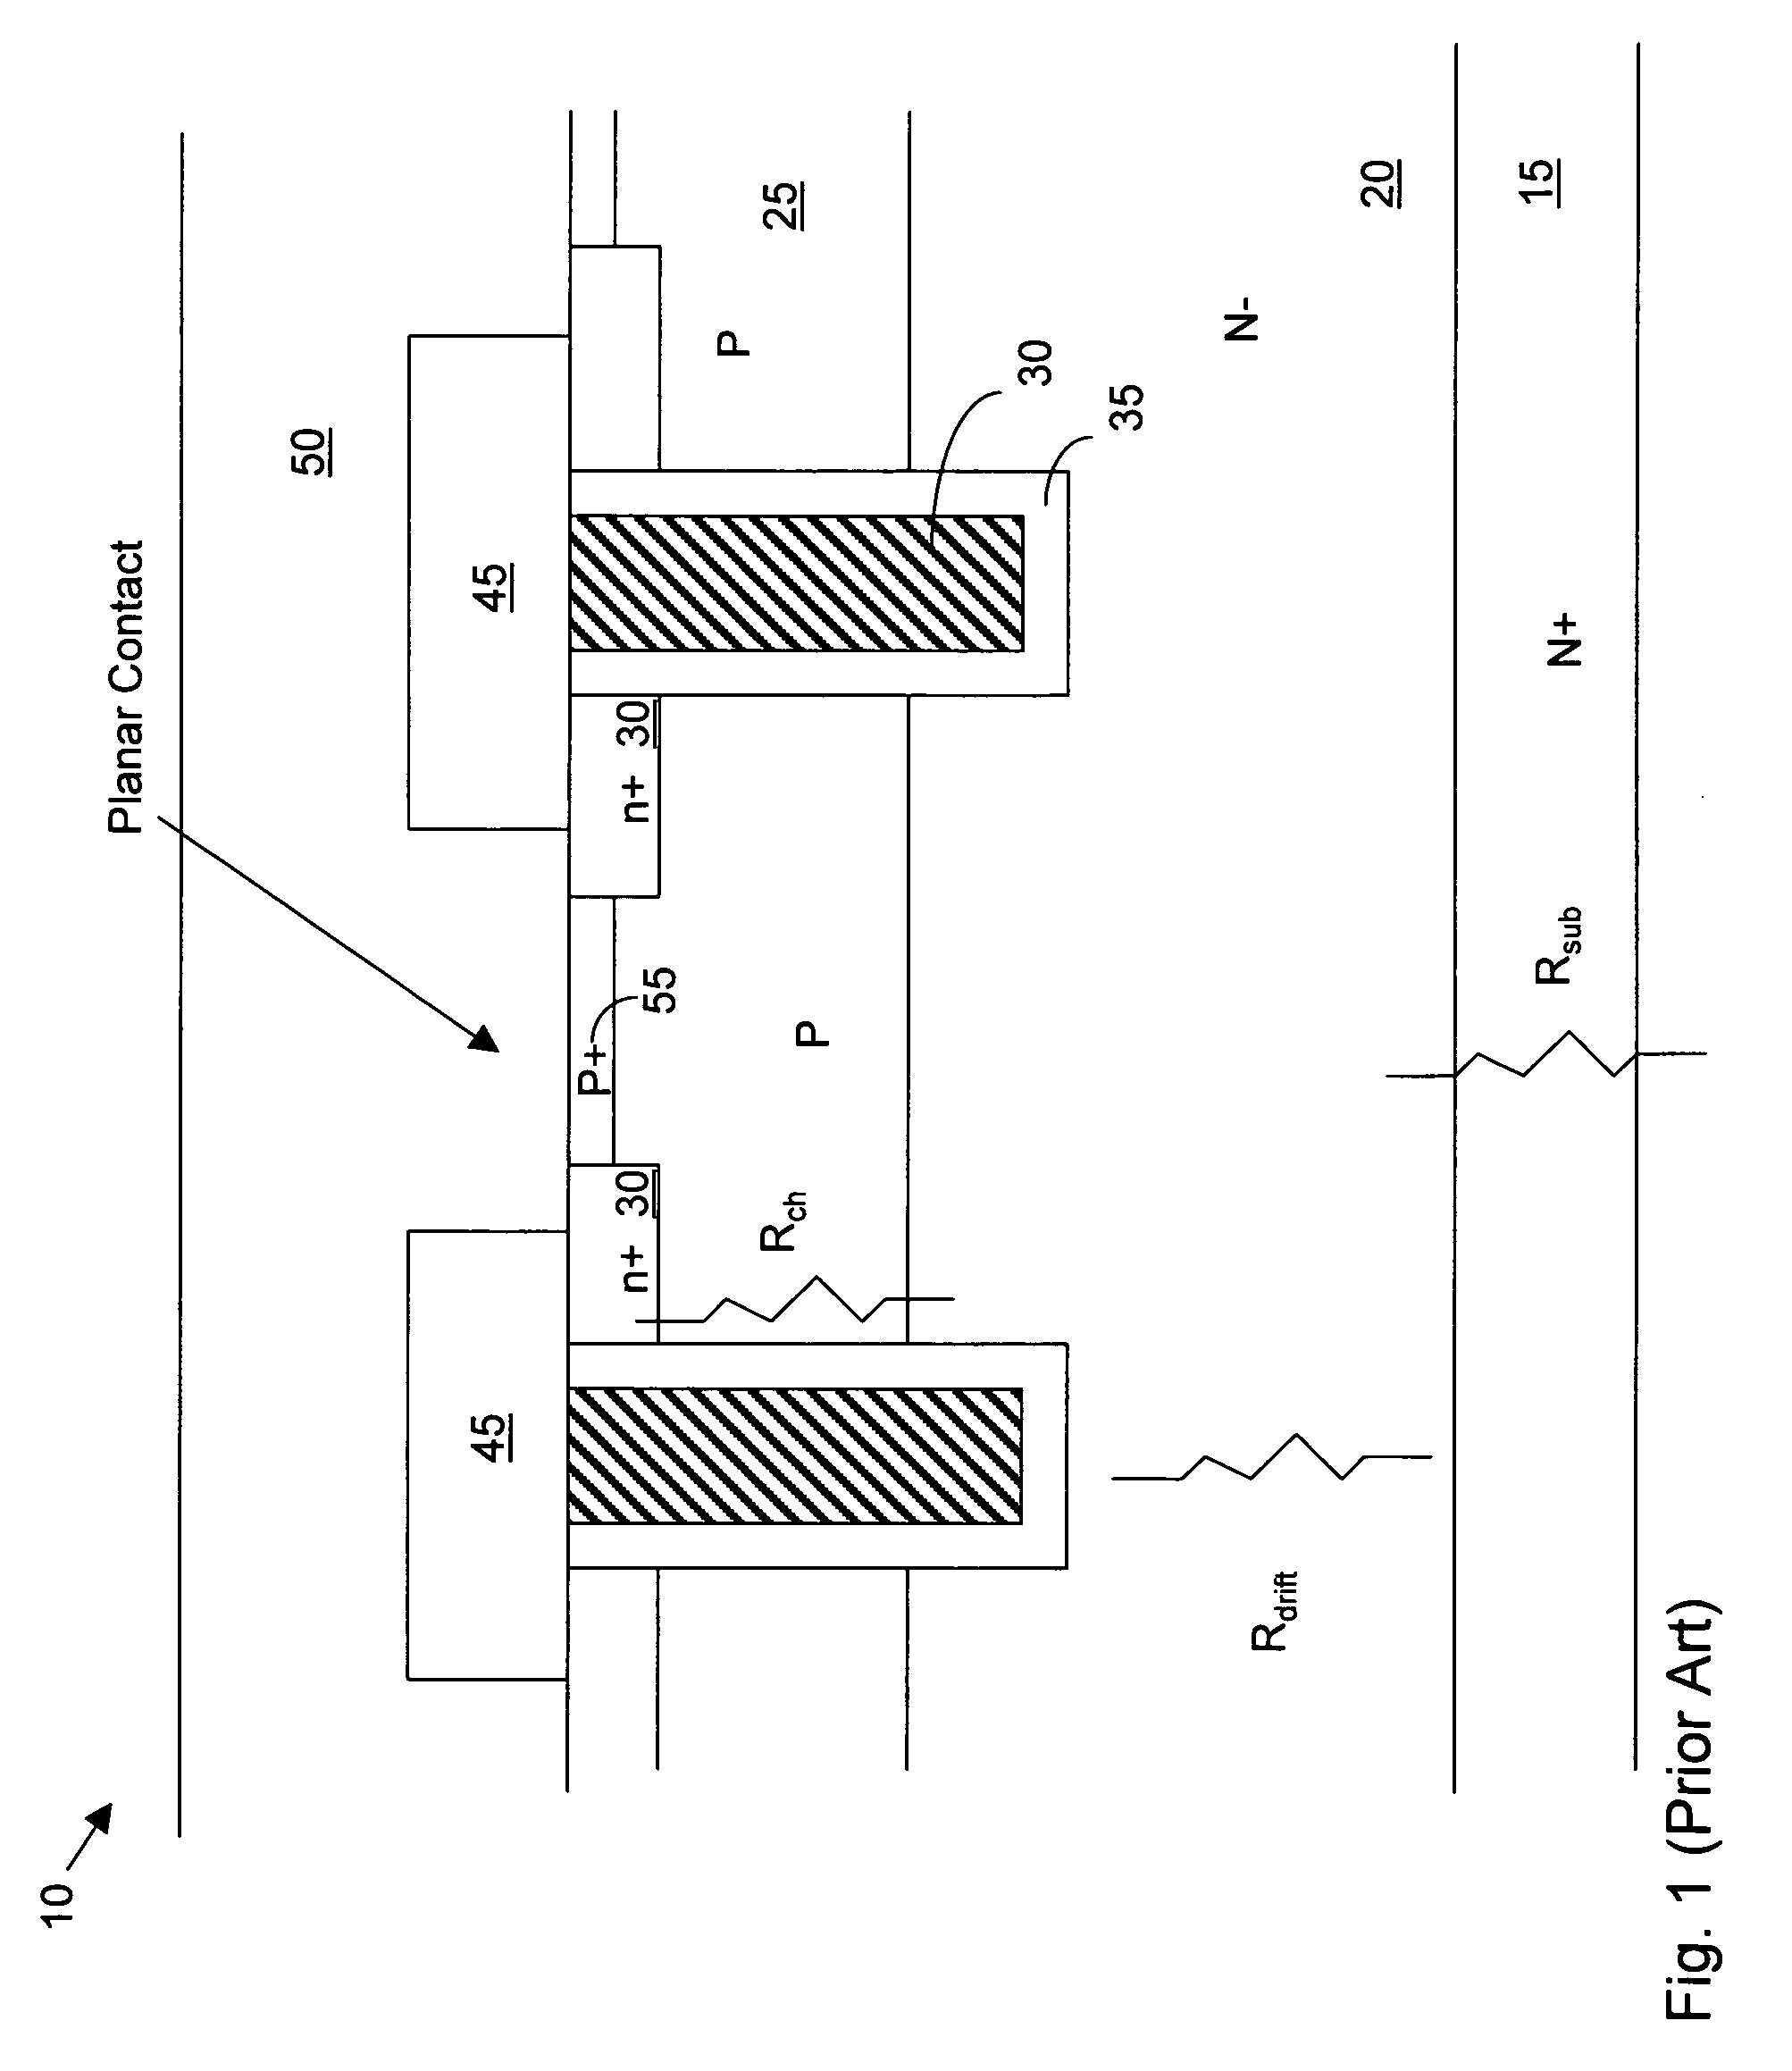 High density trench MOSFET with reduced on-resistance